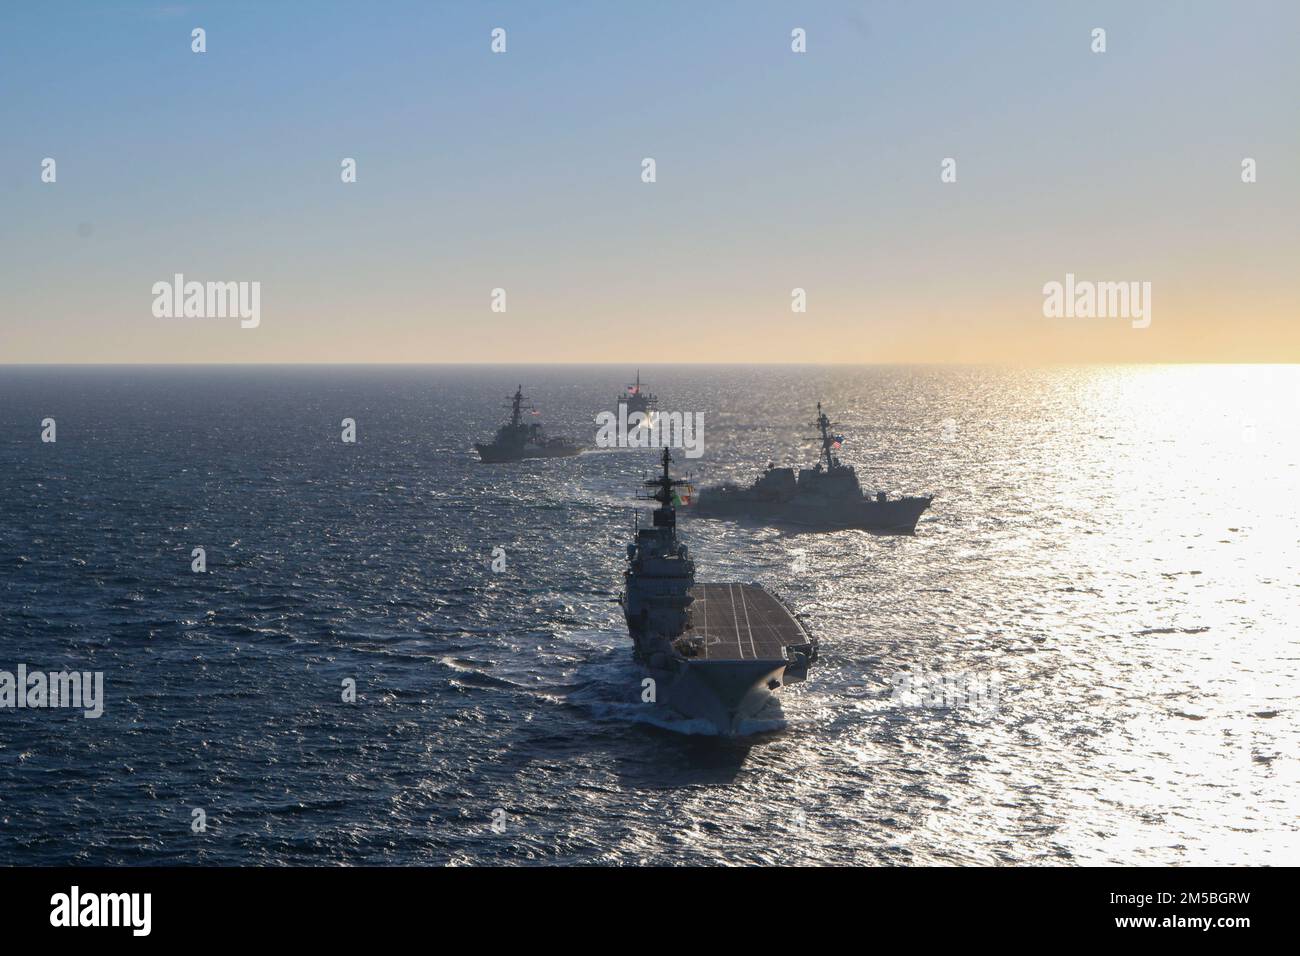 220222-N-NO901-0001 BAY OF CADIZ (Feb. 22, 2022) Italian aircraft carrier ITS Giuseppe Garibaldi leads the formation in a photo exercise with Arleigh Burke-class guided-missile destroyers USS Forrest Sherman (DDG 98) and USS Roosevelt (DDG 80) and Blue Ridge-class command and control ship USS Mount Whitney (LCC 20), Feb. 22, 2022. USS Forrest Sherman is on a regularly scheduled deployment conducting routine operations in the U.S. Sixth Fleet area of operations. Stock Photo